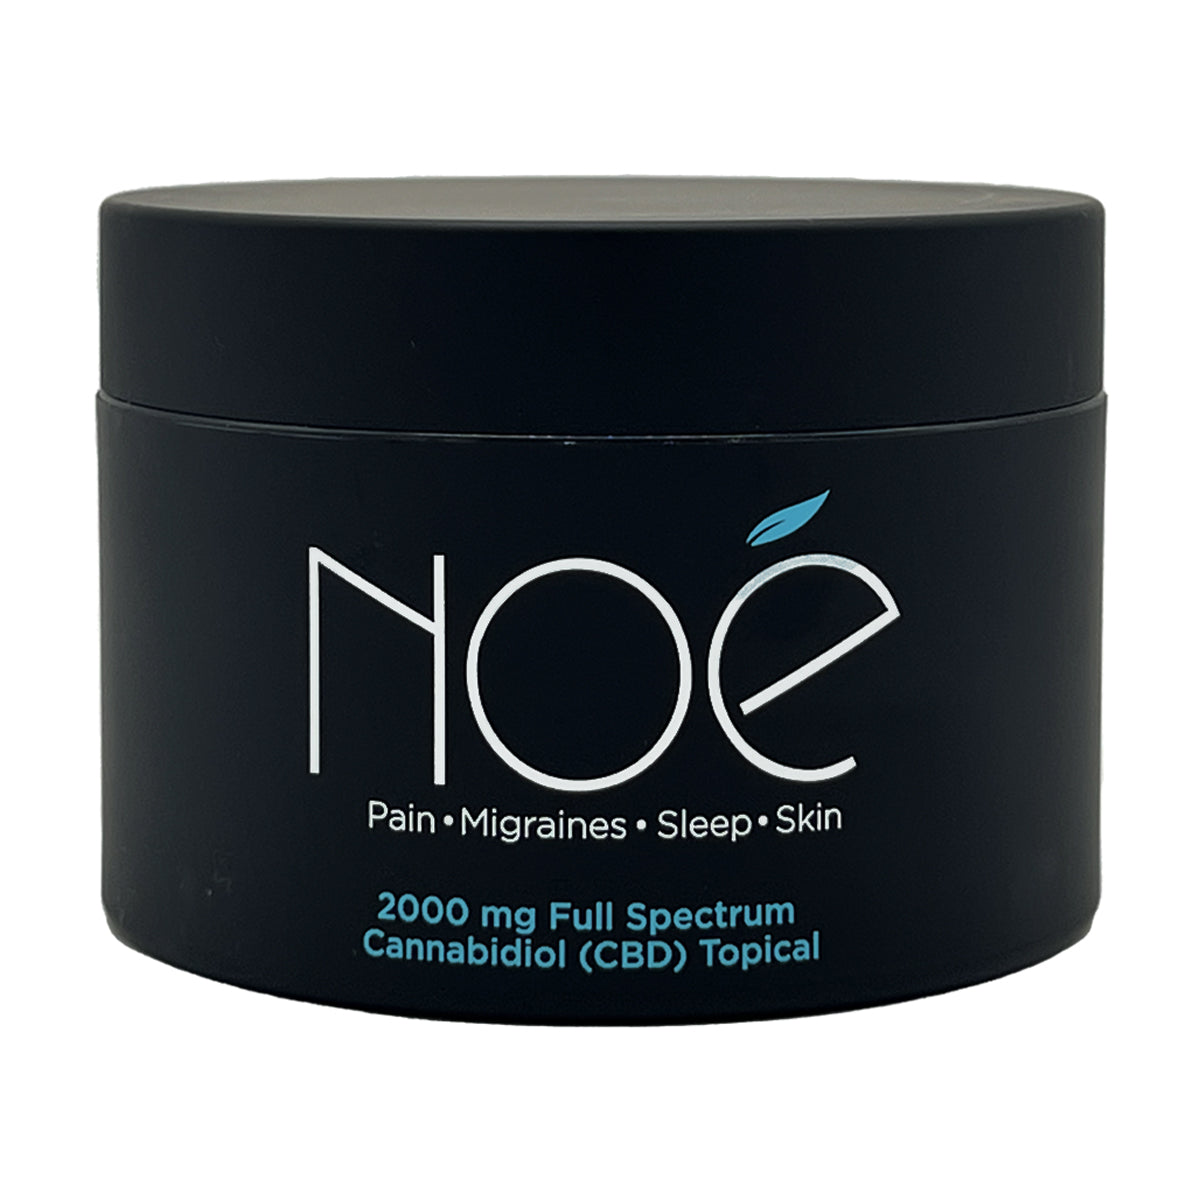 2000 mg CBD Cream for fast all natural pain relief - Noé